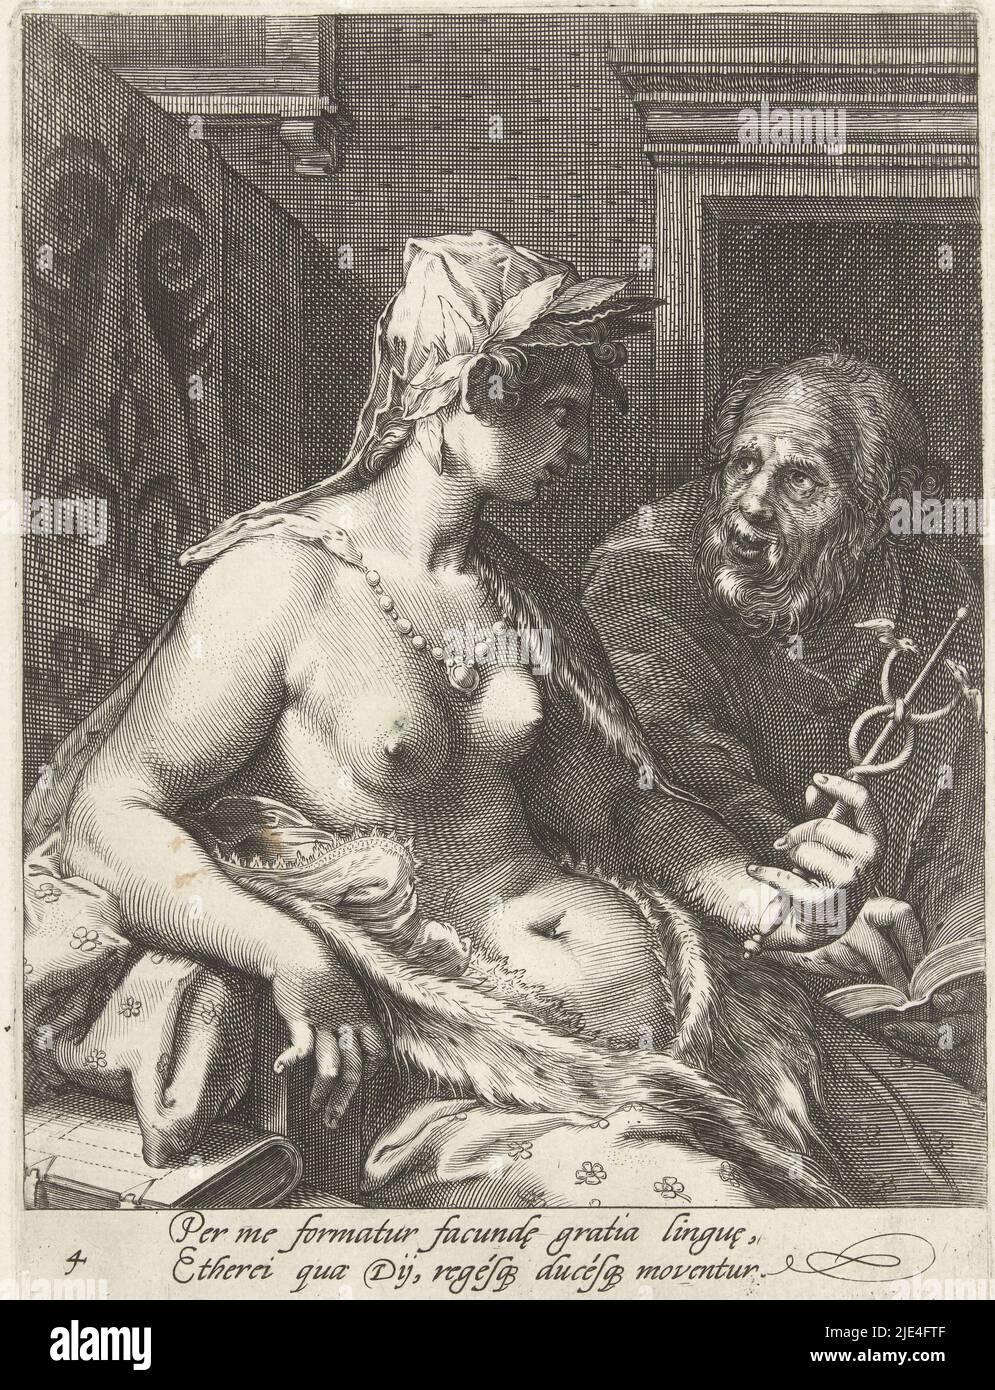 Rhetoric, Cornelis Jacobsz. Drebbel, after Hendrick Goltzius, 1587 - 1605, Rhetoric, wearing a laurel wreath and a caduceus, in conversation with an older man. The man is writing something in a book. With a Latin caption by C. Schonaeus., print maker: Cornelis Jacobsz. Drebbel, Hendrick Goltzius, Cornelius Schonaeus, print maker: Netherlands, Haarlem, 1587 - 1605, paper, engraving, h 178 mm × w 130 mm Stock Photo